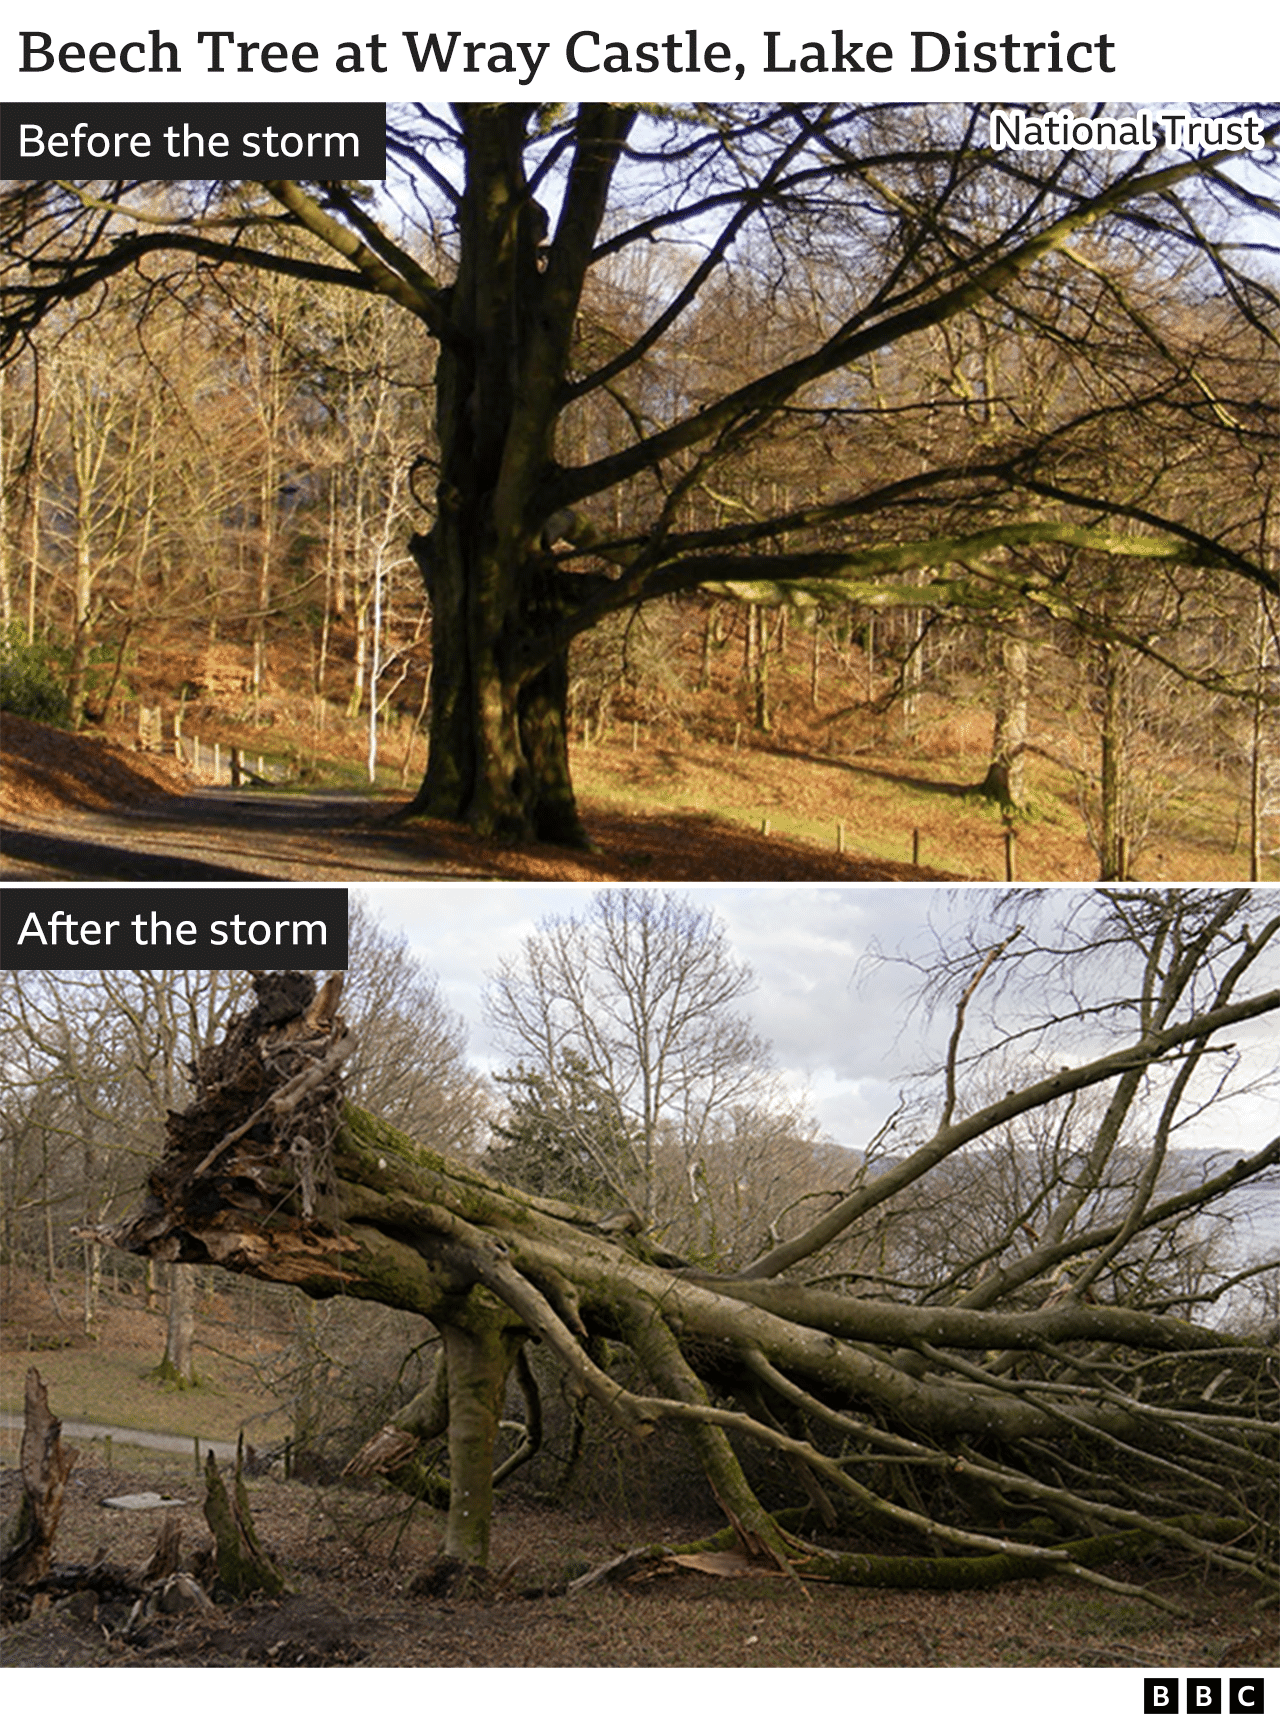 Beech Tree at Wray Castle, Lake District before and after the storm